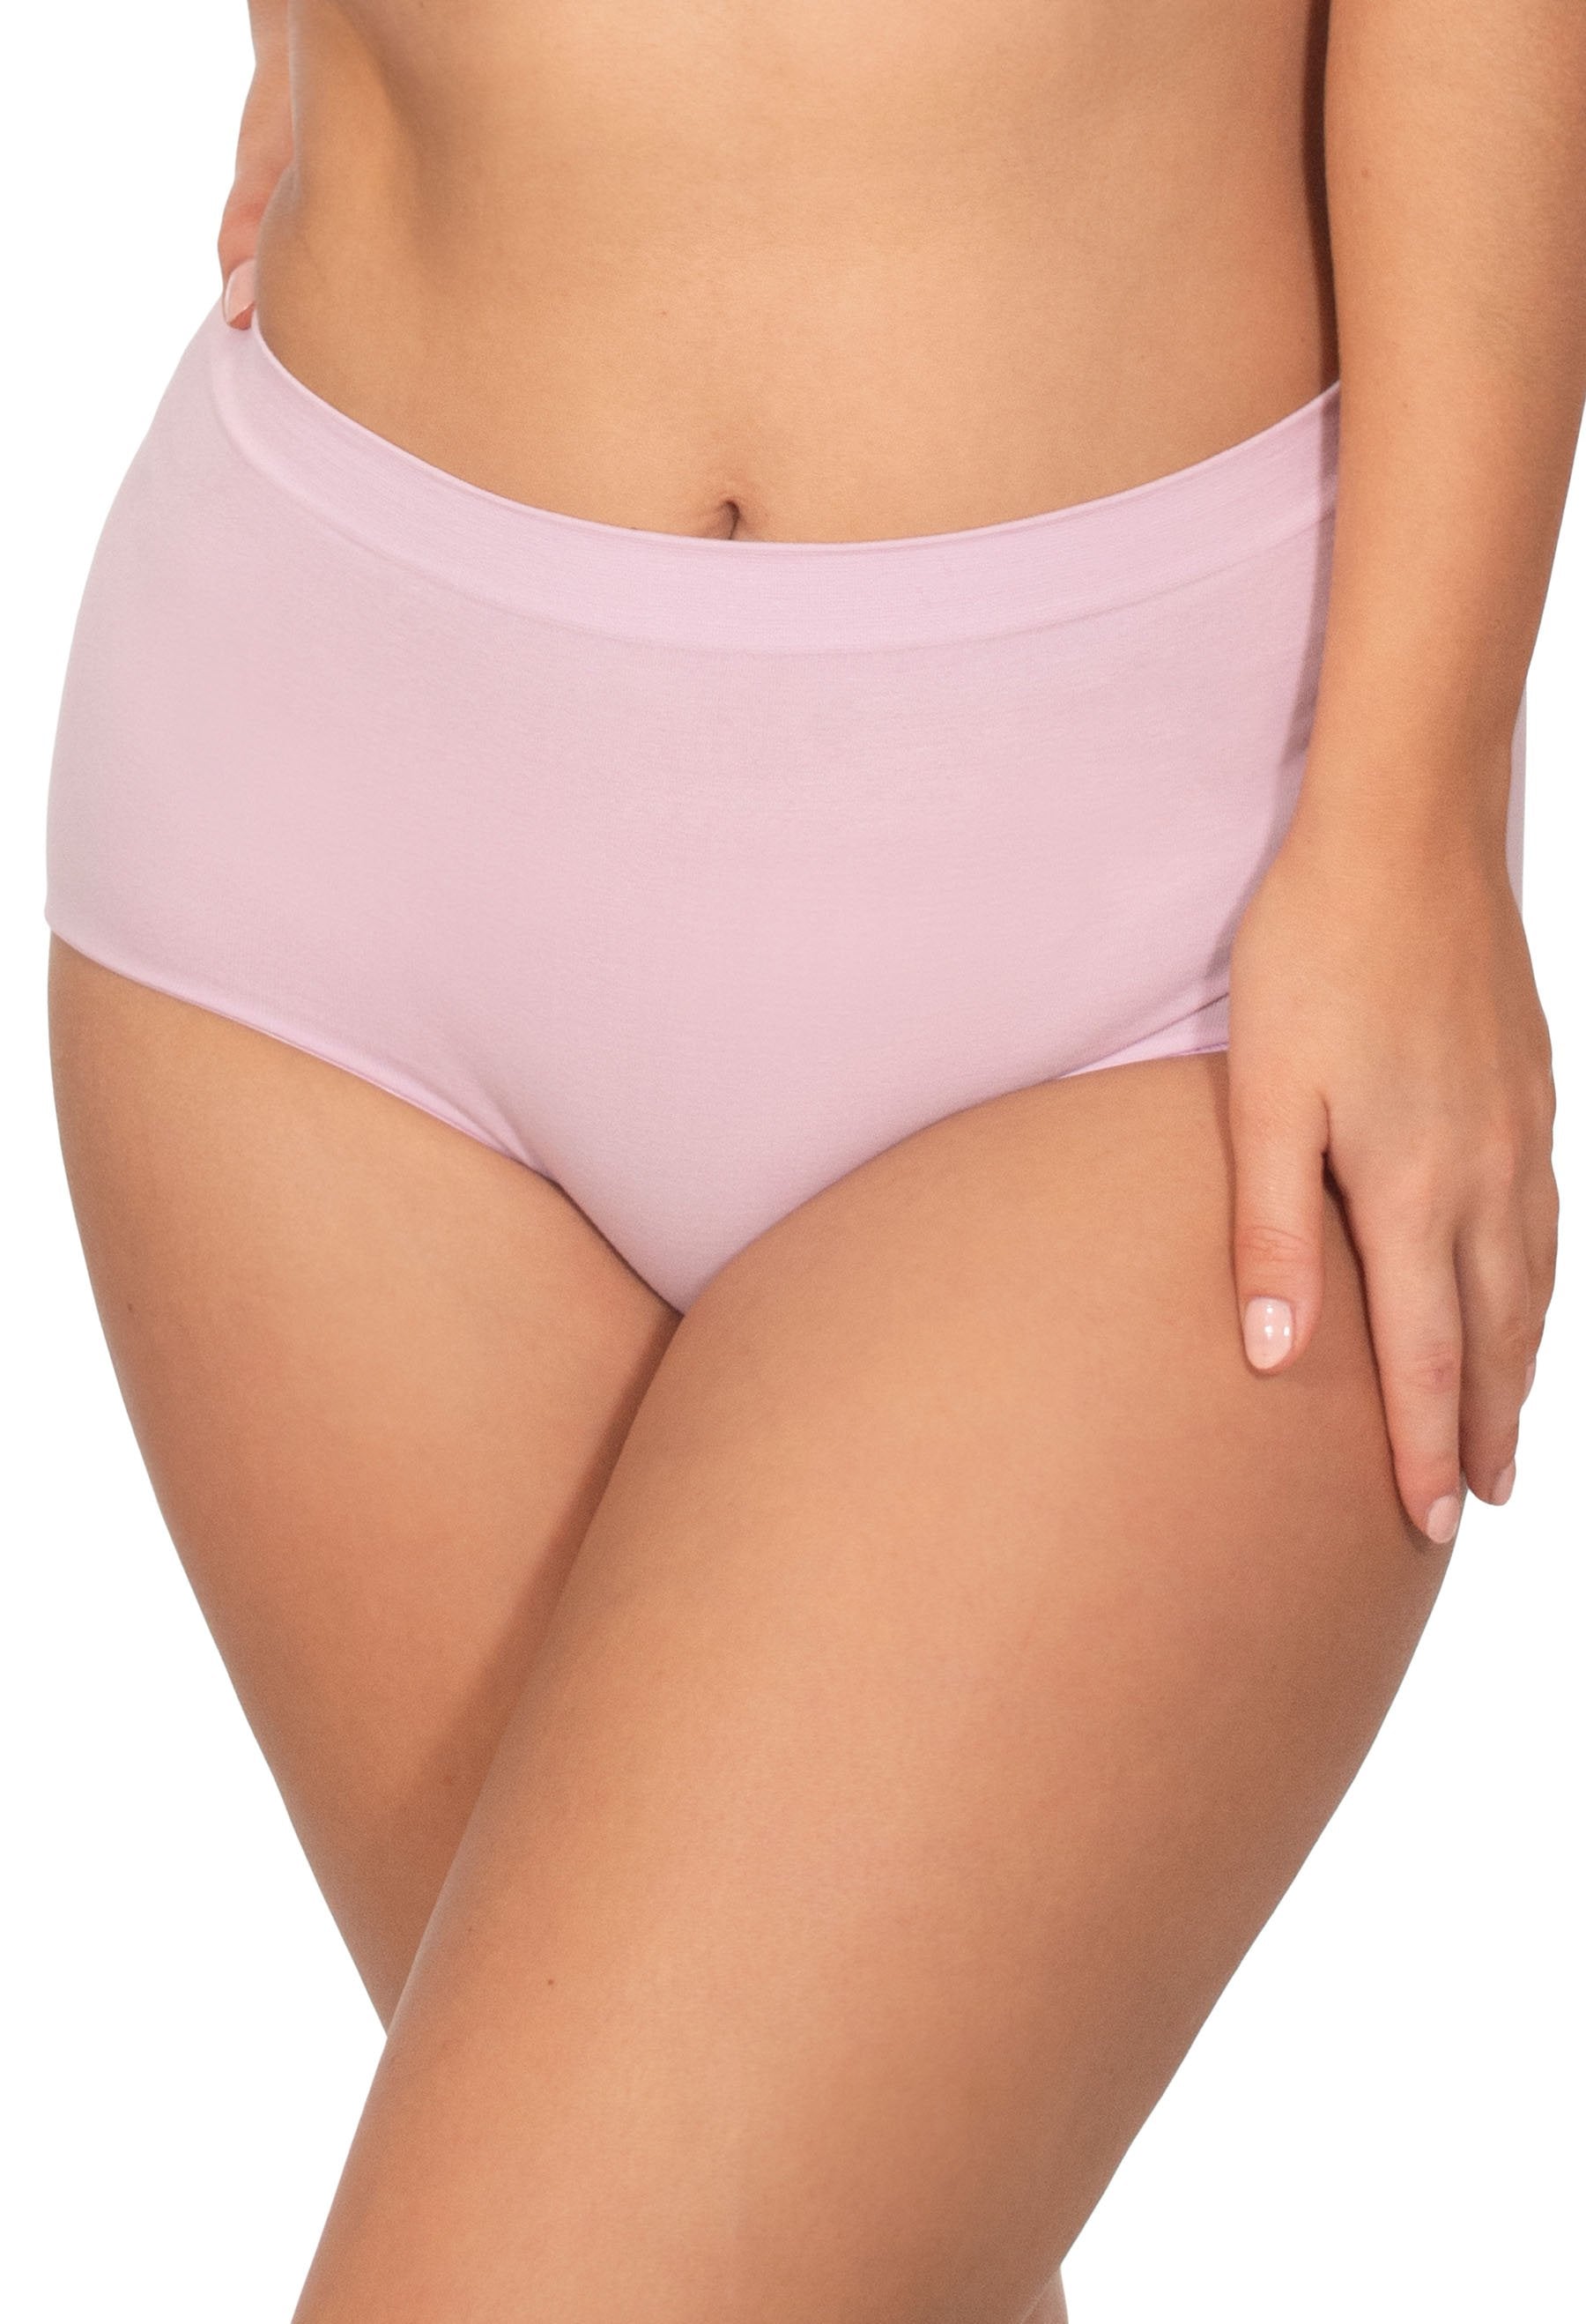 Buy Black/White/Nude Full Brief Cotton Blend Knickers 6 Pack from Next  Australia